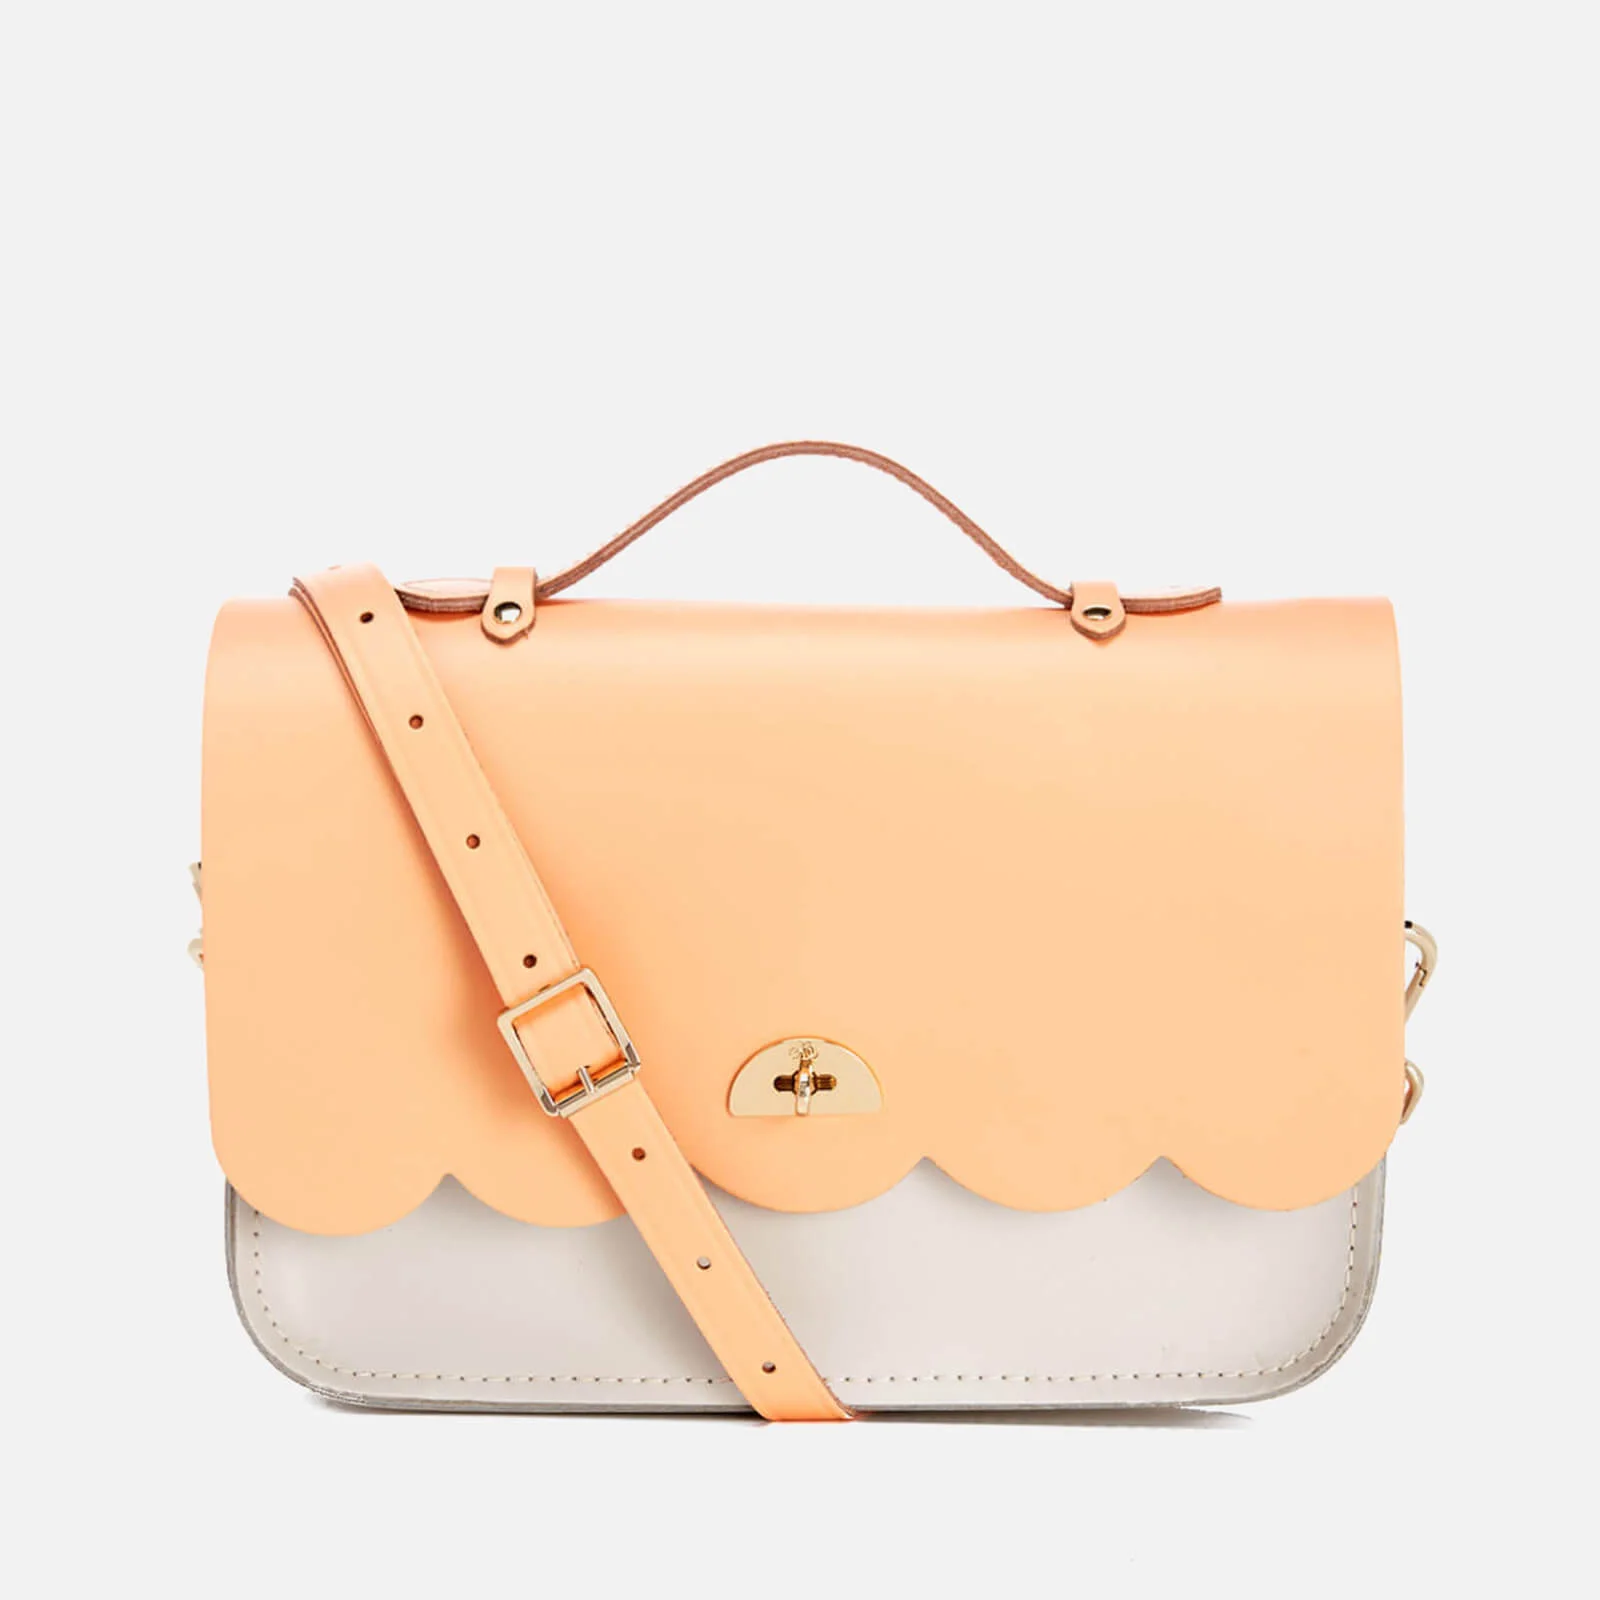 The Cambridge Satchel Company Women's Cloud Bag with Handle - Two Tone Peony Peach/Clay Image 1